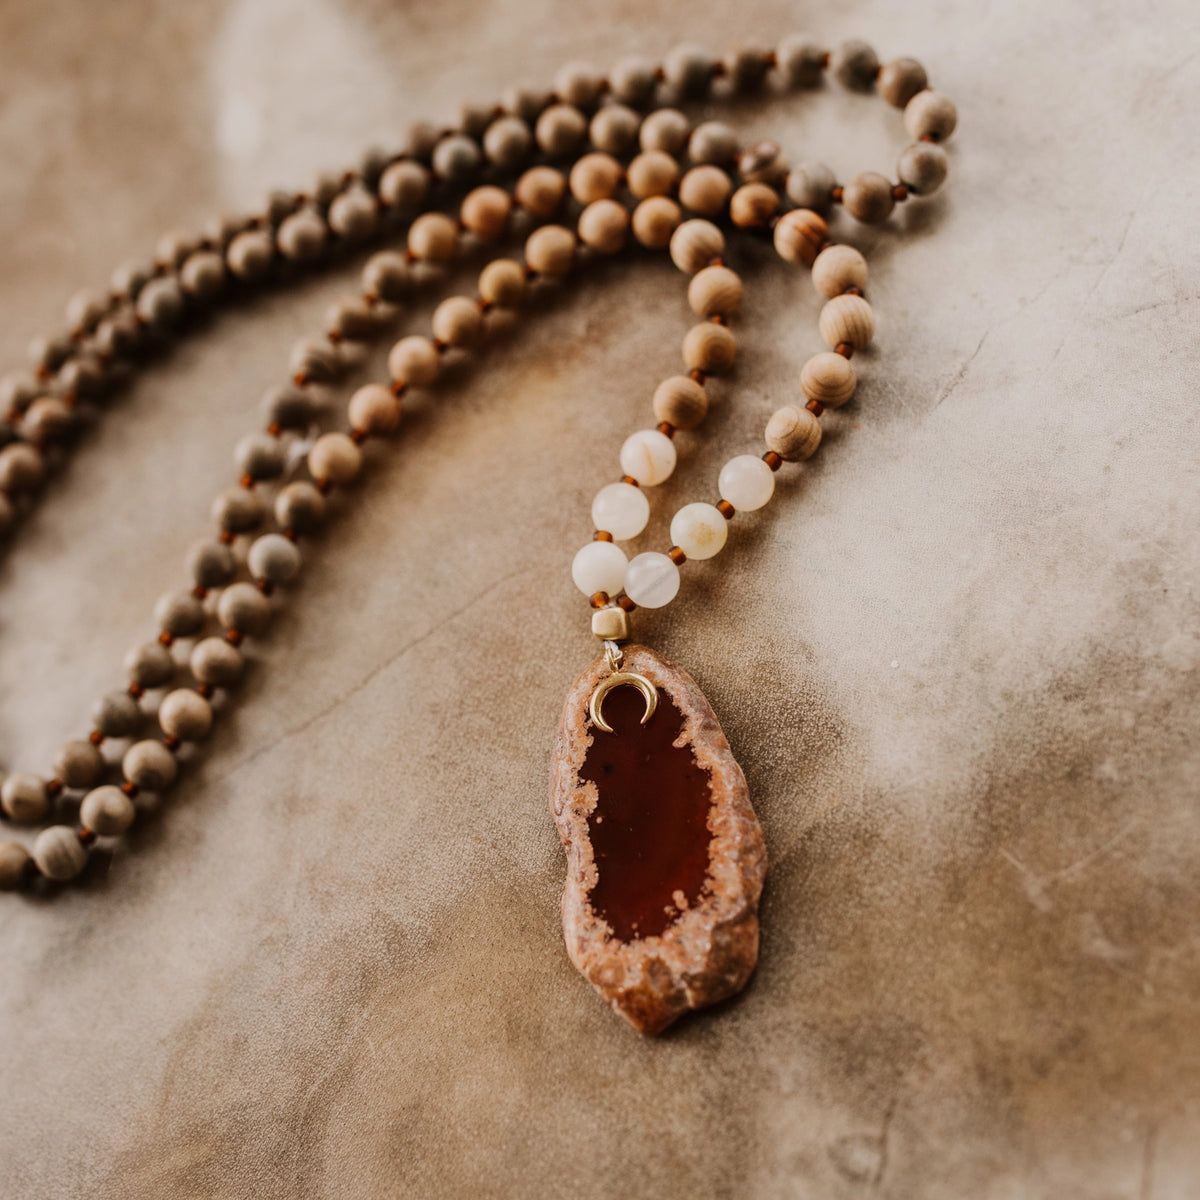 Mala Necklace with Pendant